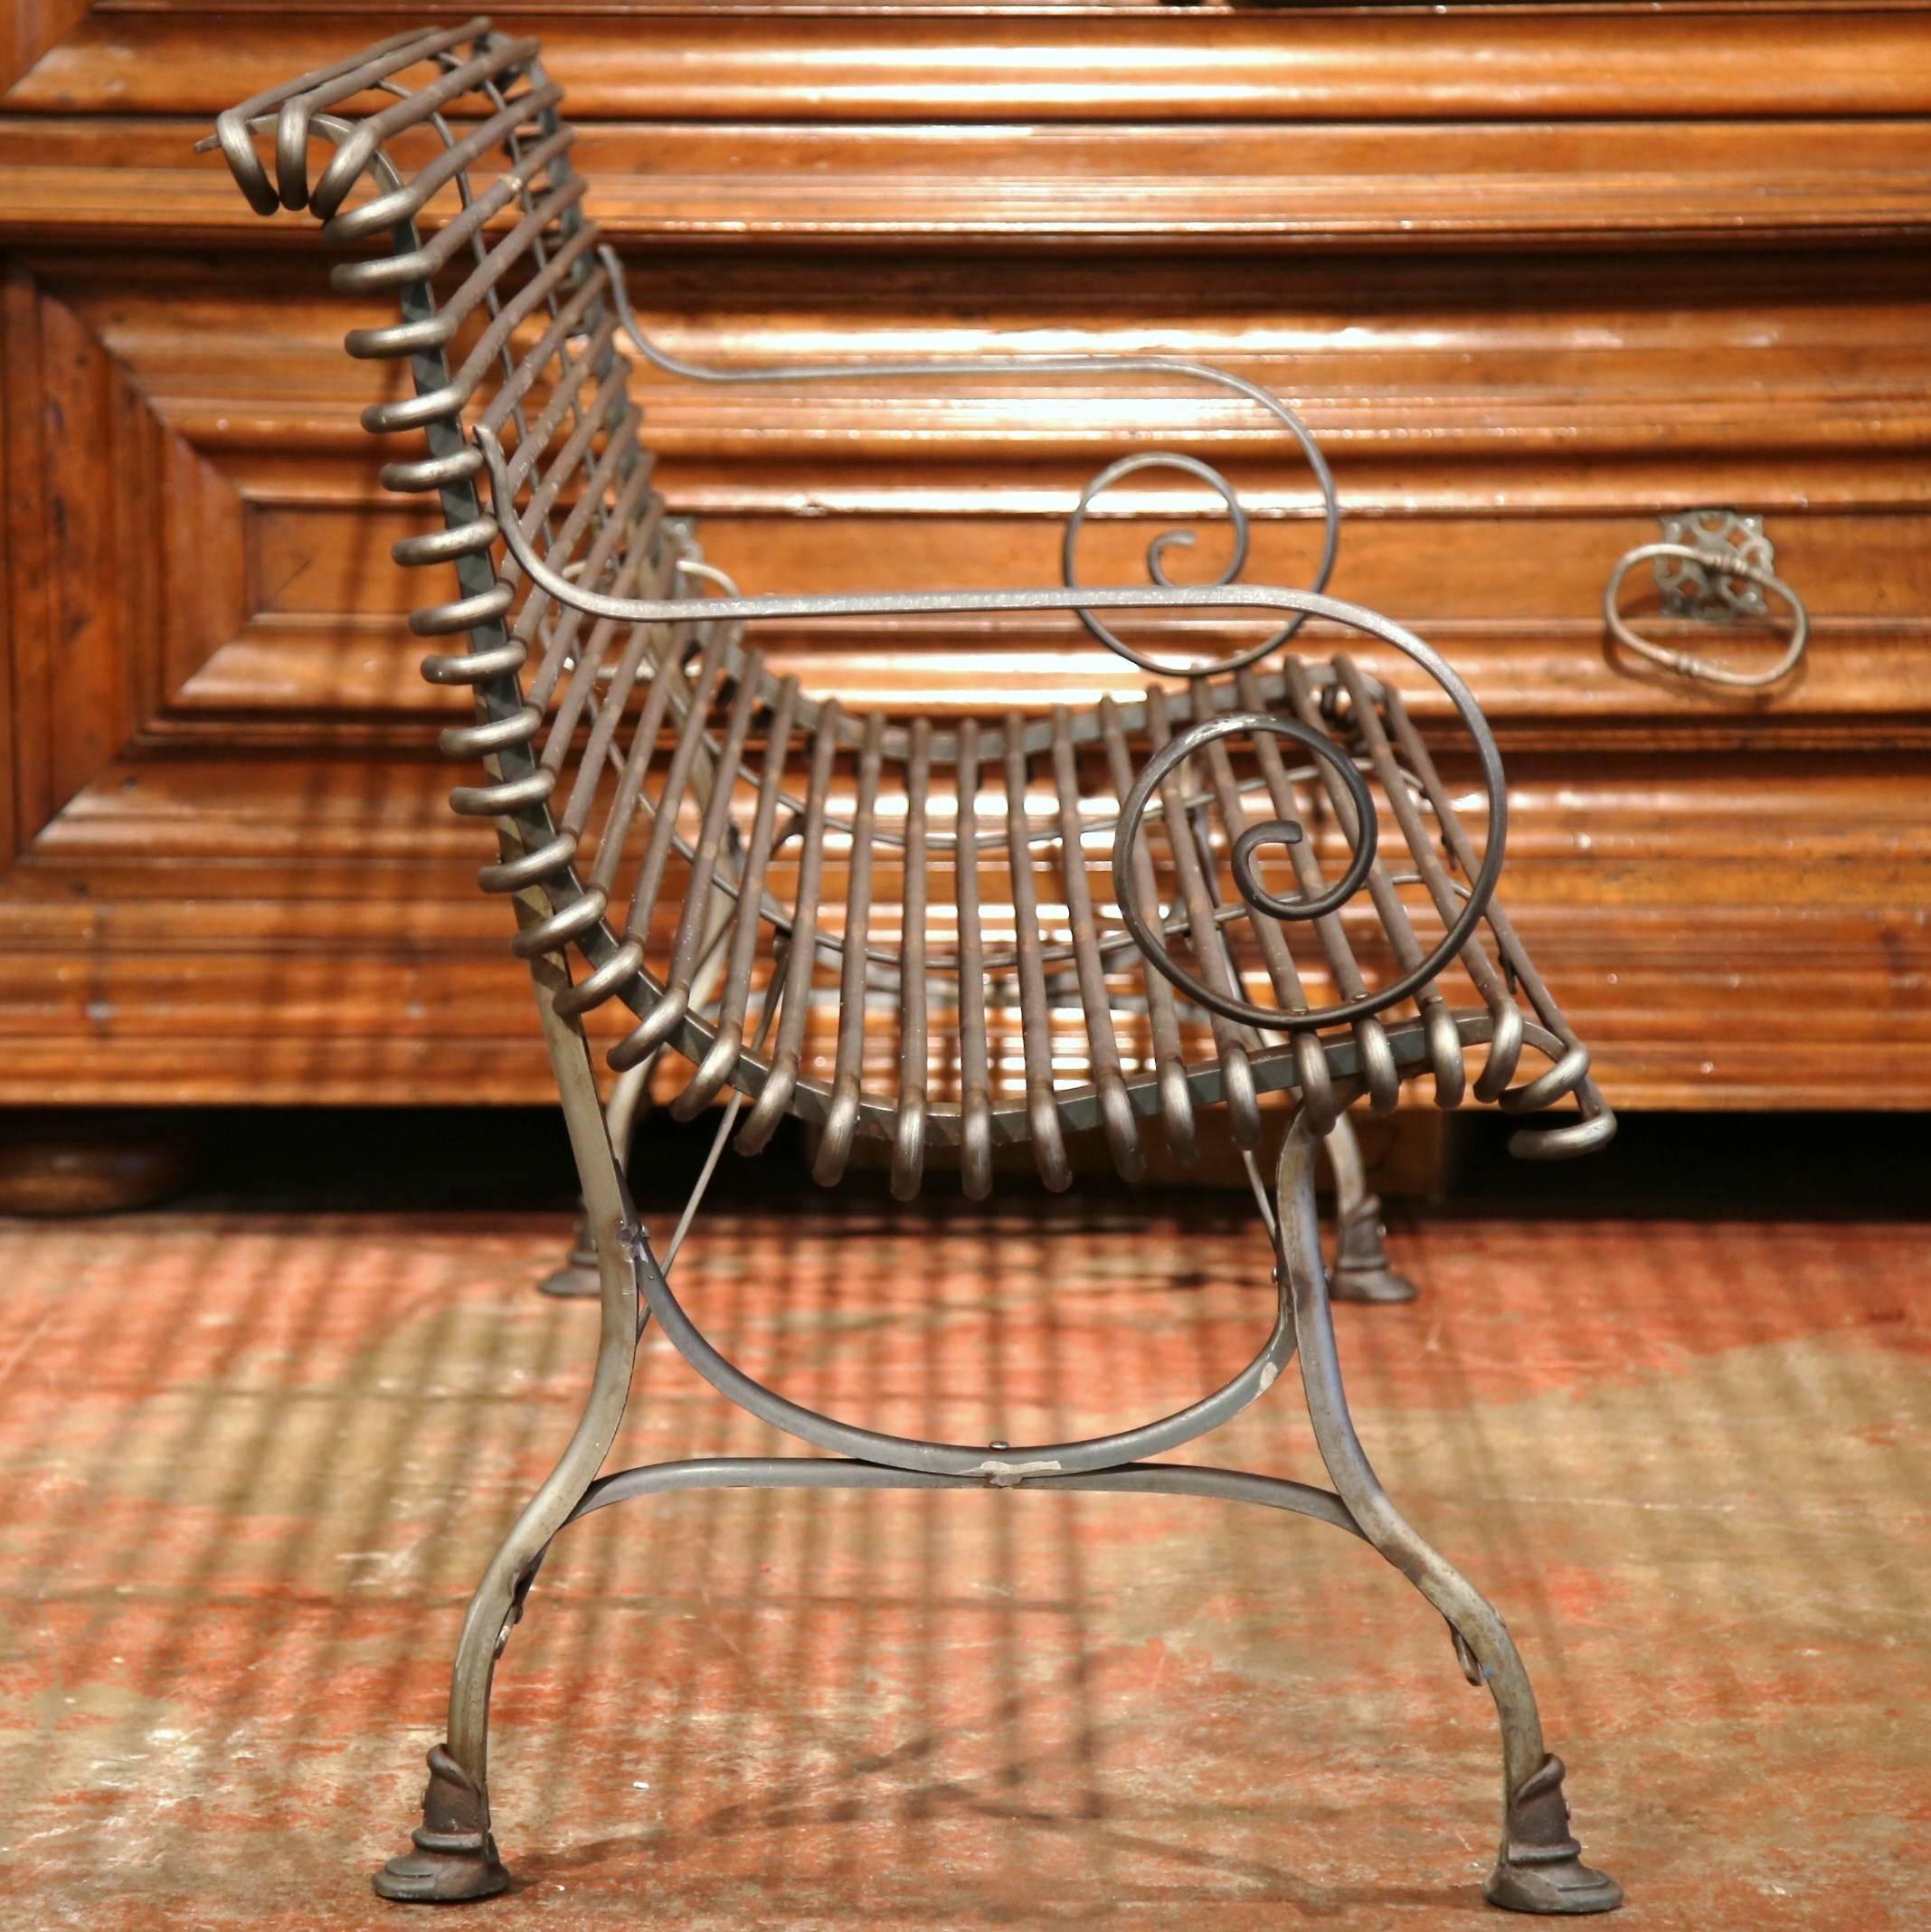 French Polished Iron Bench with Scrolled Arms and Hoof Feet Signed Sauveur Arras 2